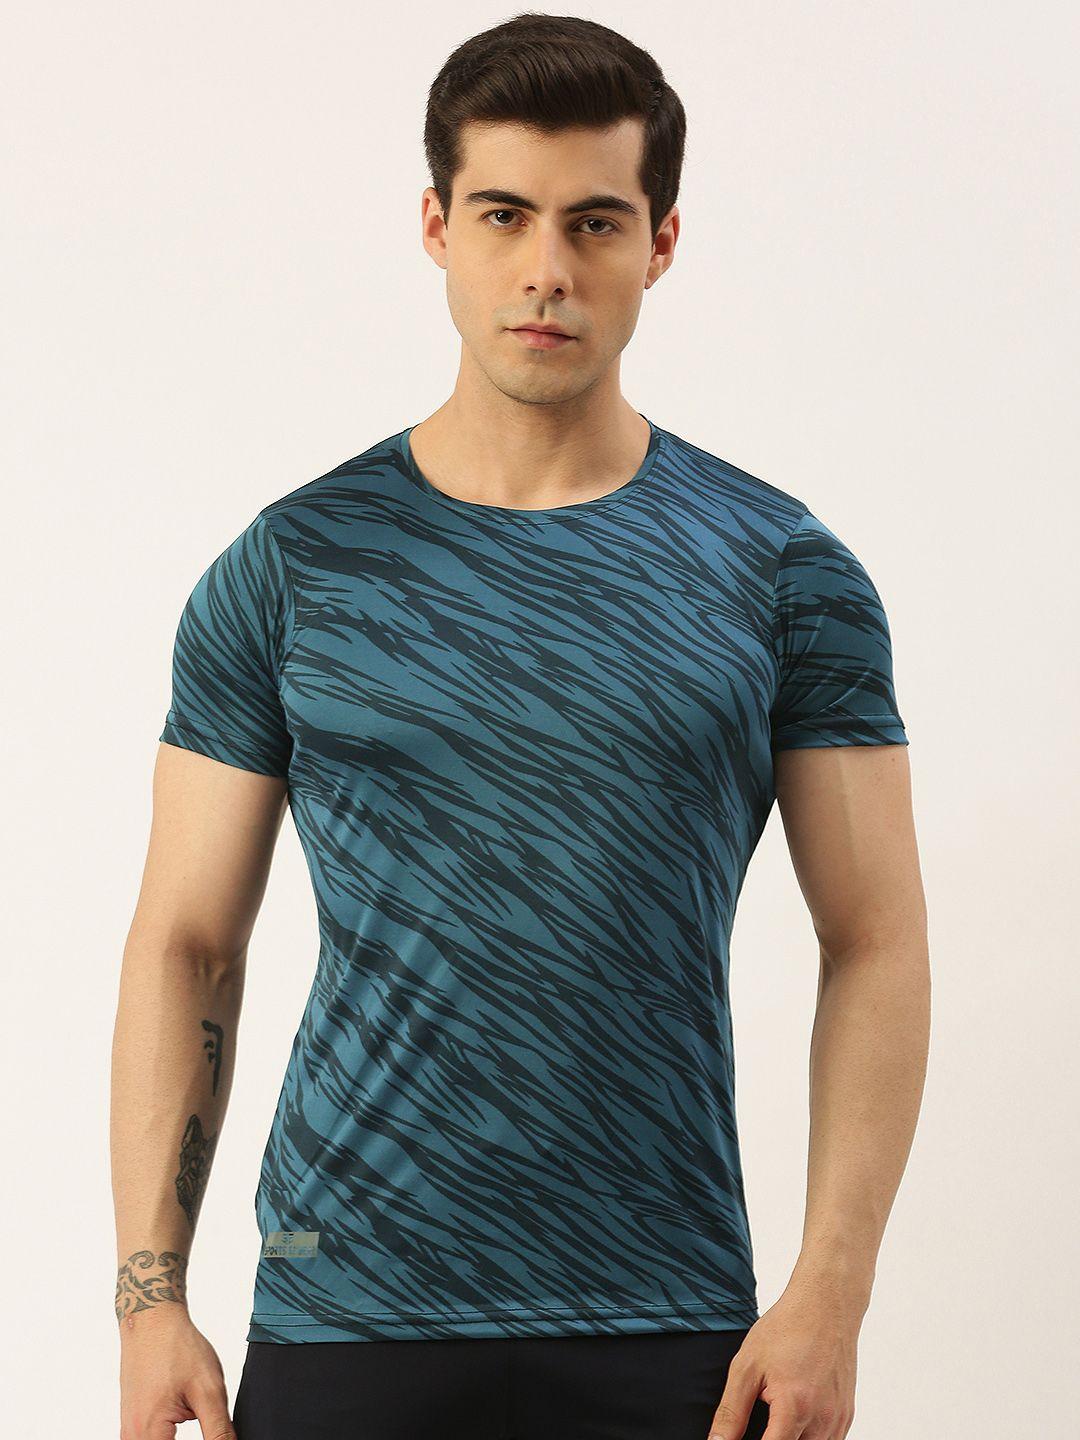 sports52 wear men abstract printed round neck t-shirt